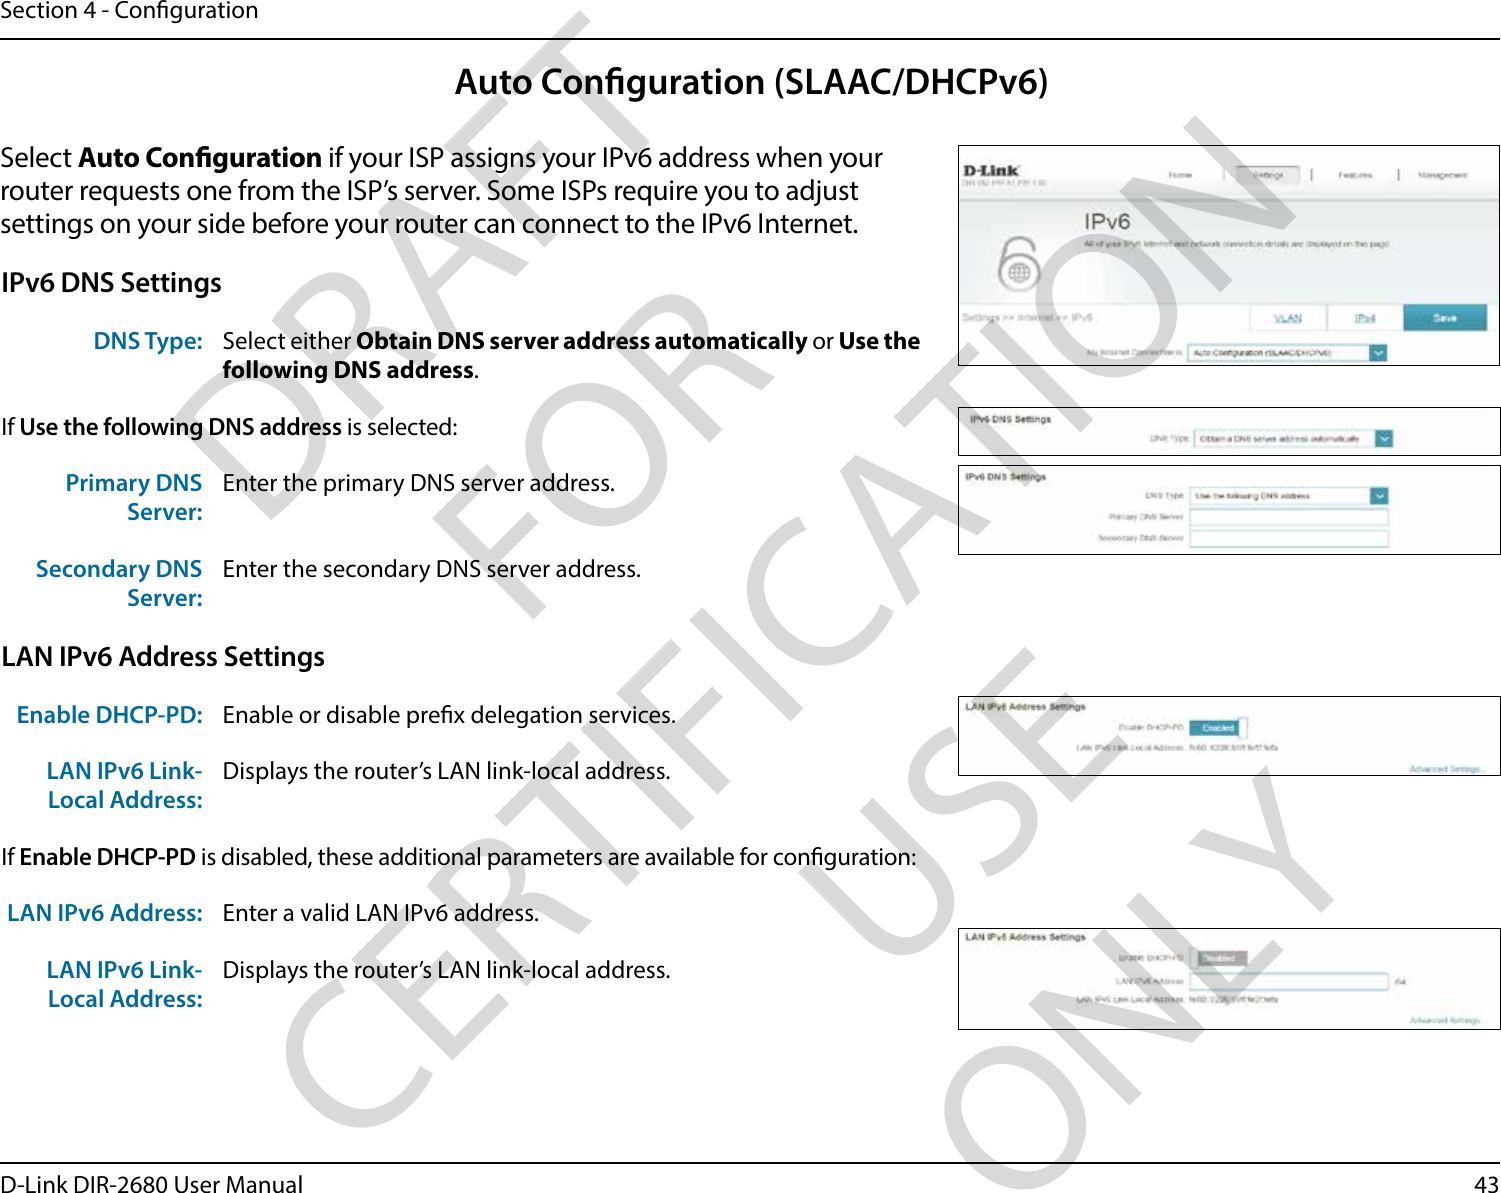 43D-Link DIR-2680 User ManualSection 4 - CongurationAuto Conguration (SLAAC/DHCPv6)Select Auto Conguration if your ISP assigns your IPv6 address when your router requests one from the ISP’s server. Some ISPs require you to adjust settings on your side before your router can connect to the IPv6 Internet.IPv6 DNS SettingsDNS Type: Select either Obtain DNS server address automatically or Use the following DNS address.If Use the following DNS address is selected:Primary DNS Server:Enter the primary DNS server address. Secondary DNS Server:Enter the secondary DNS server address.LAN IPv6 Address SettingsEnable DHCP-PD: Enable or disable prex delegation services.LAN IPv6 Link-Local Address:Displays the router’s LAN link-local address.If Enable DHCP-PD is disabled, these additional parameters are available for conguration:LAN IPv6 Address: Enter a valid LAN IPv6 address.LAN IPv6 Link-Local Address:Displays the router’s LAN link-local address.DRAFT FOR CERTIFICATION USE ONLY